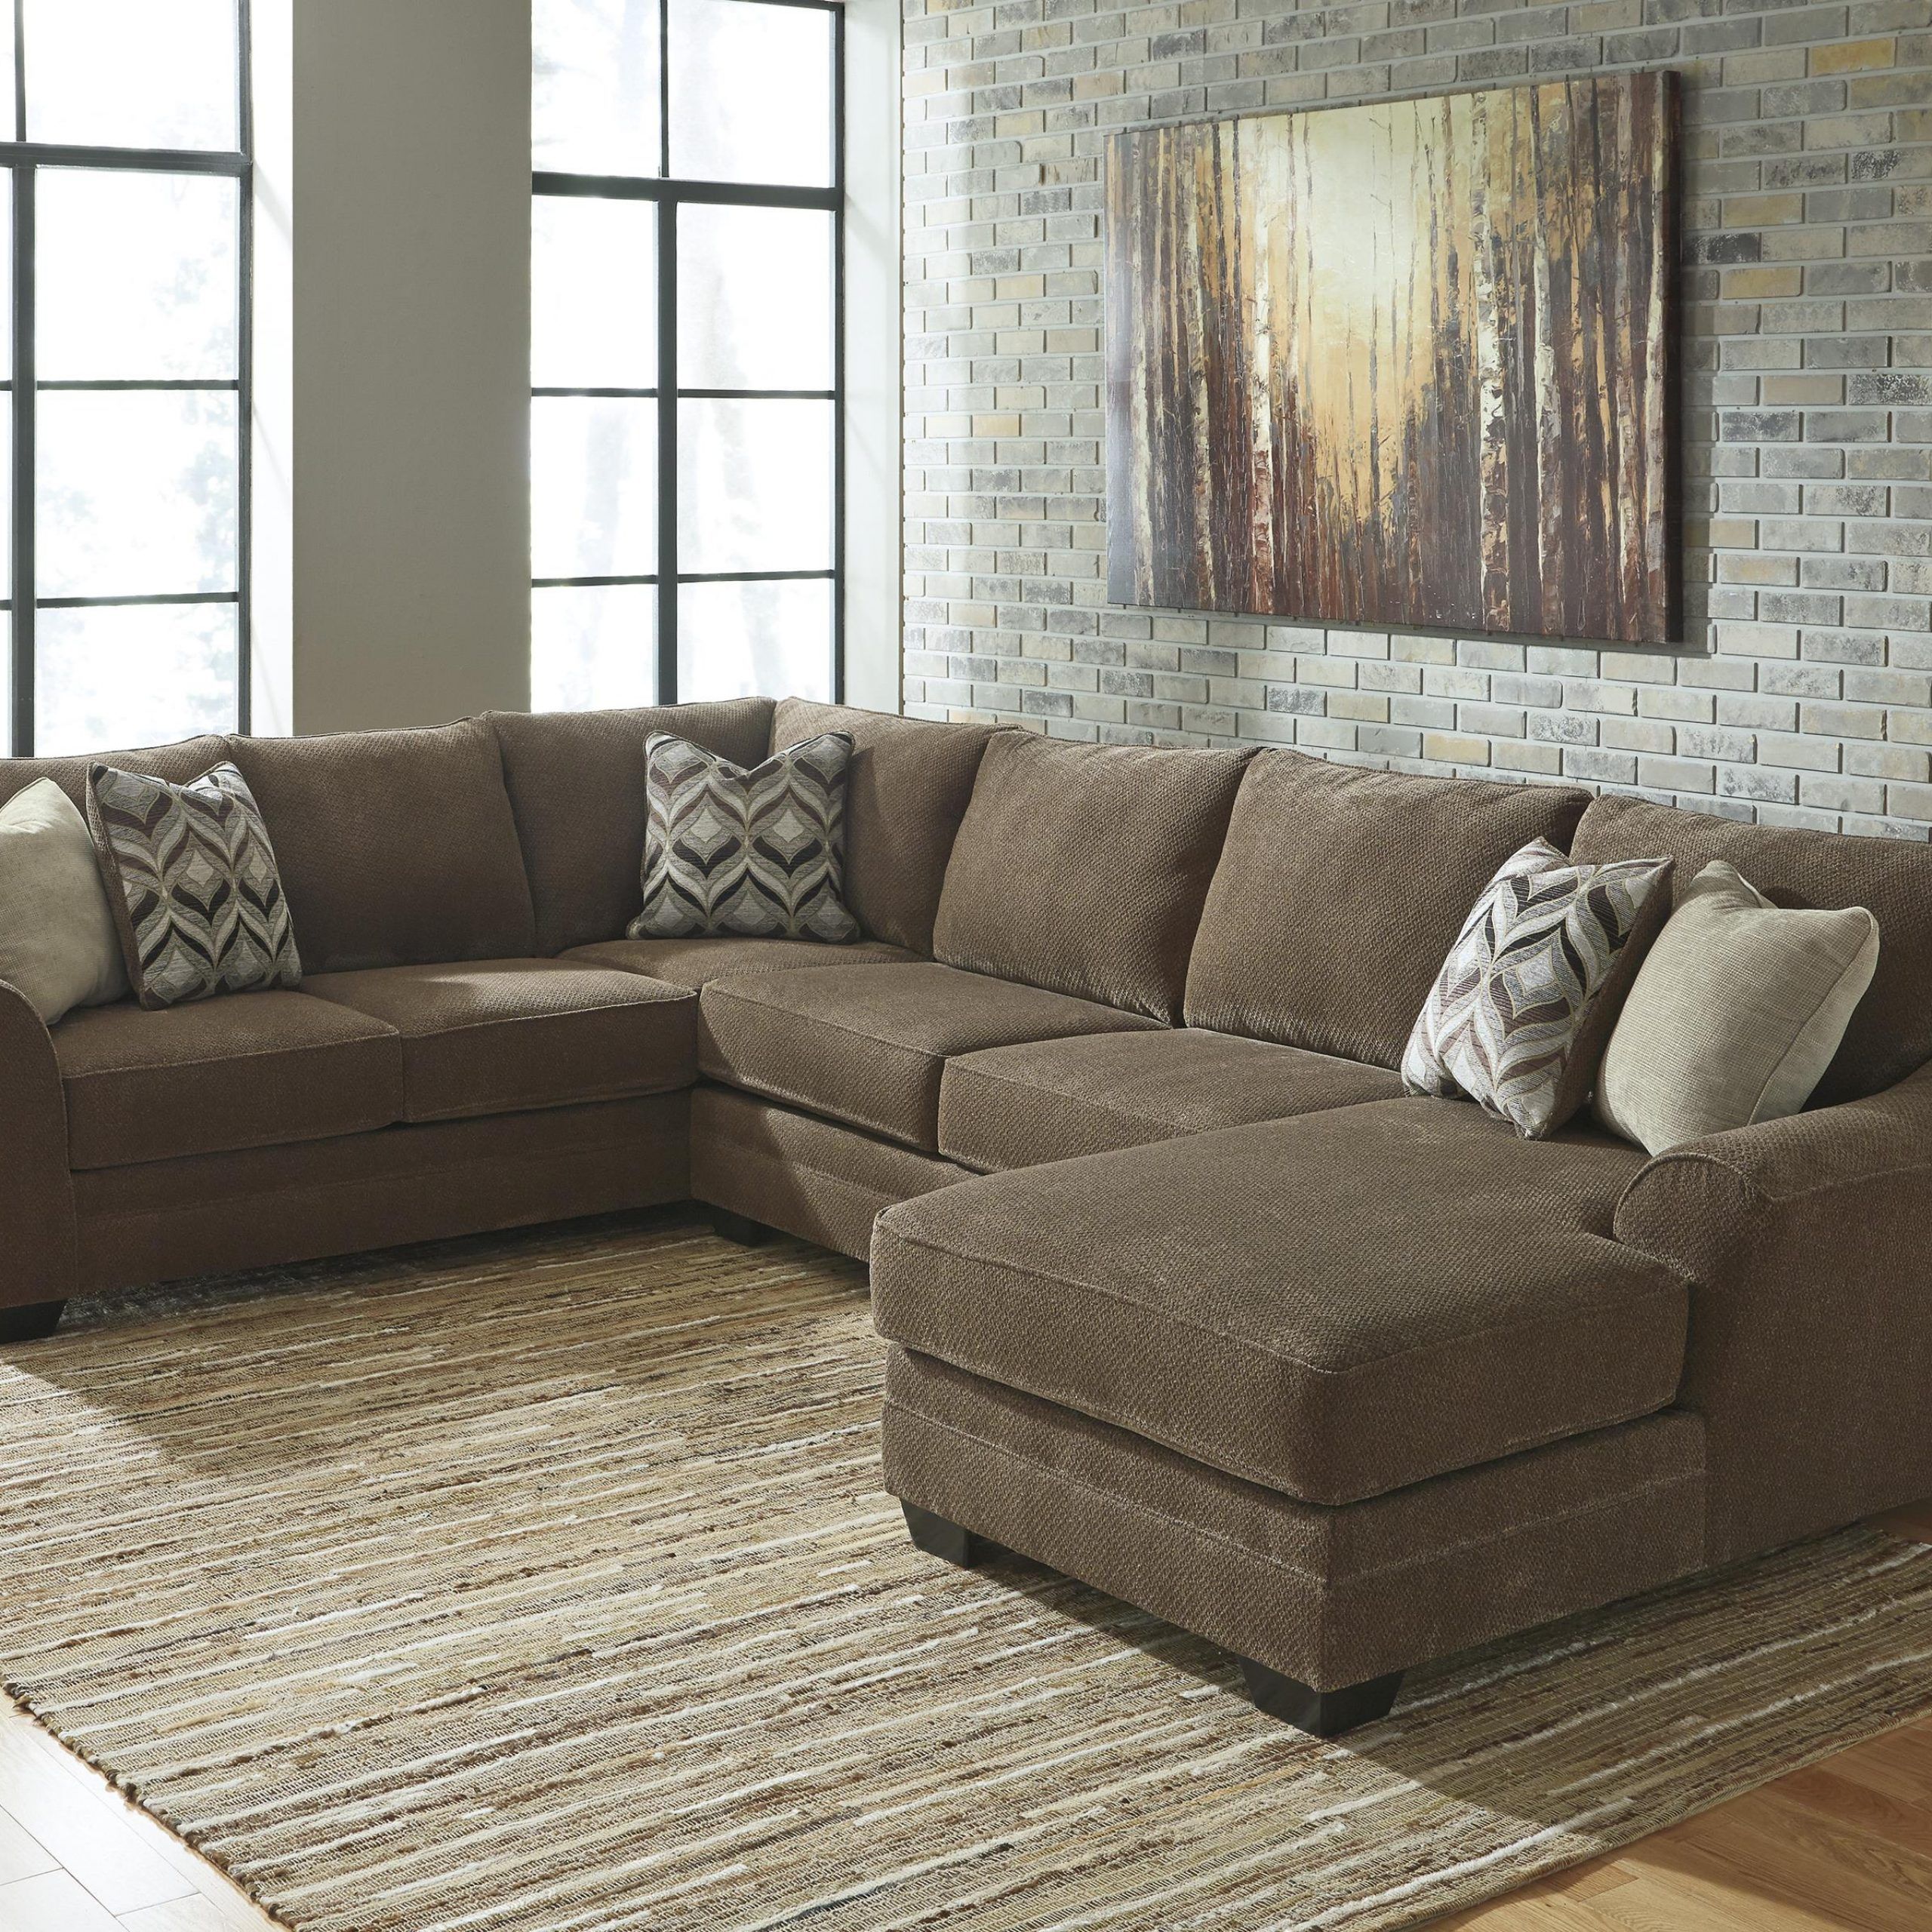 Benchcraft Justyna Contemporary 3 Piece Sectional With Pertaining To 3pc Polyfiber Sectional Sofas (Photo 3 of 15)